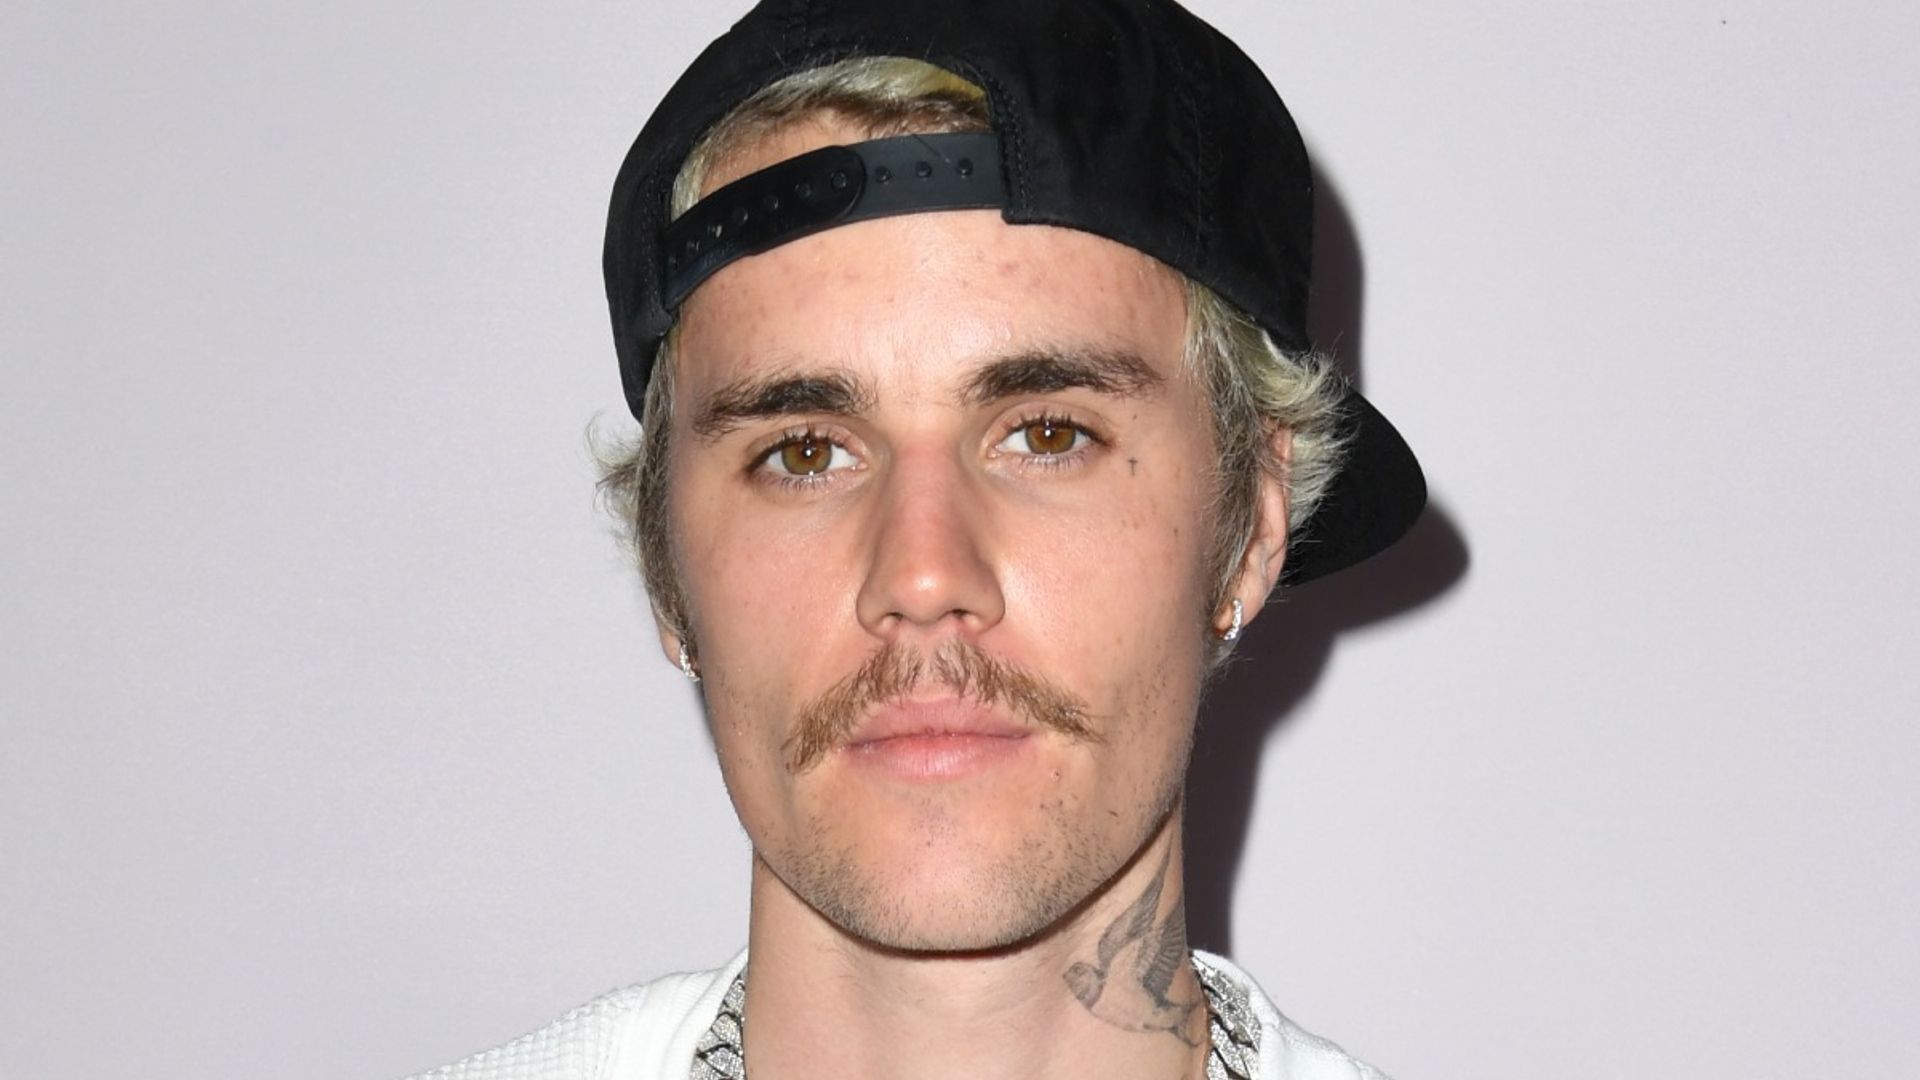 Justin Bieber Shares Shocking Health Update With Fans After Canceling Tour Hello